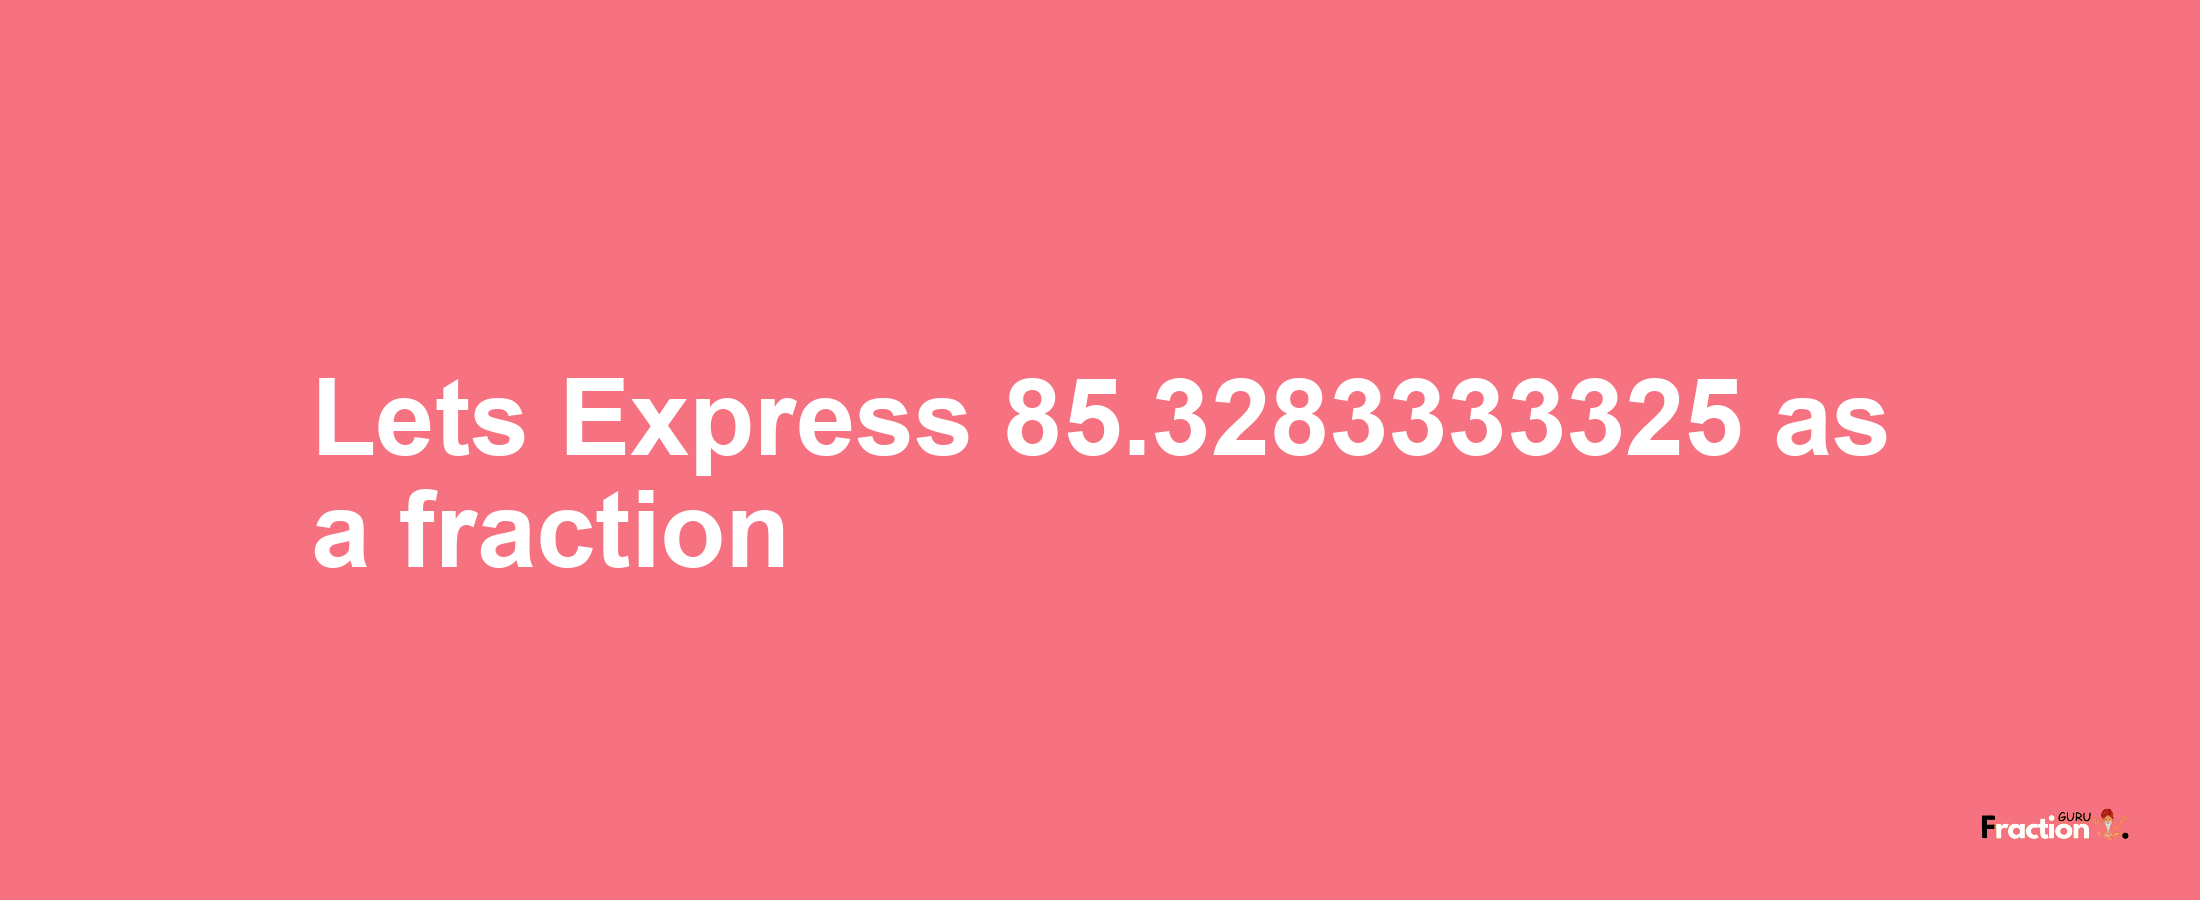 Lets Express 85.3283333325 as afraction